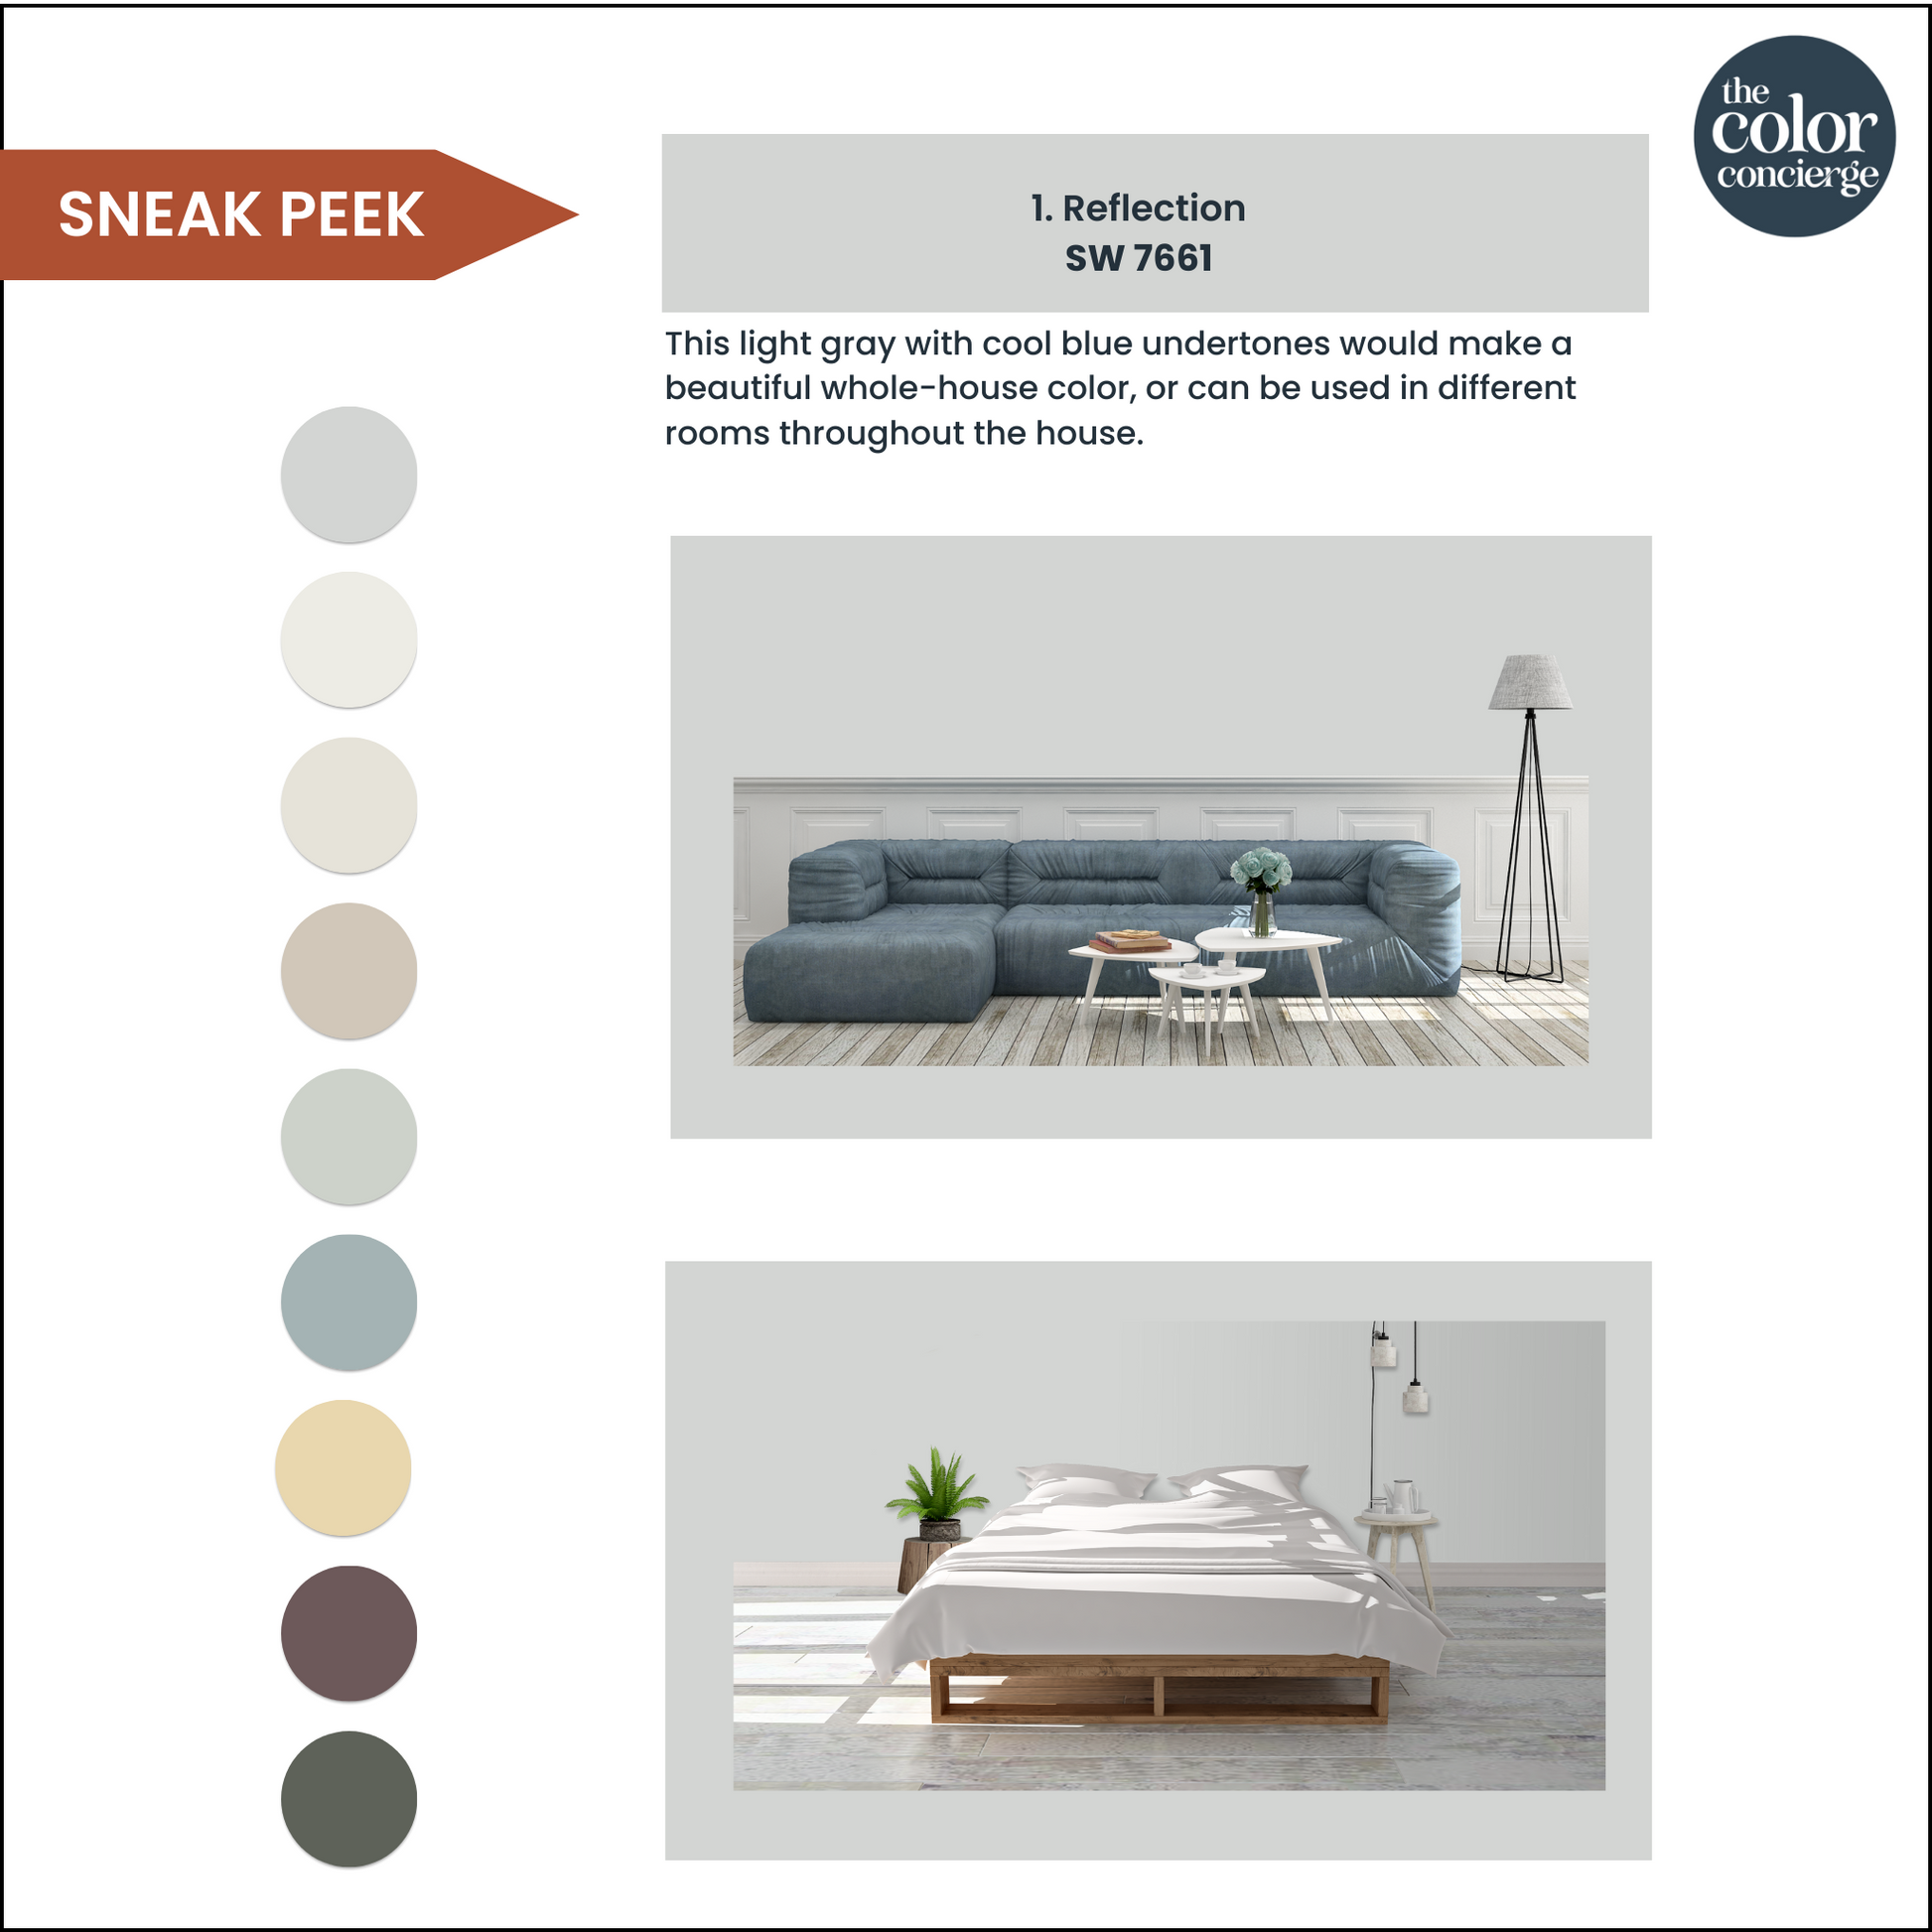 A page showing how to use a Sherwin-Williams Reflection color palette